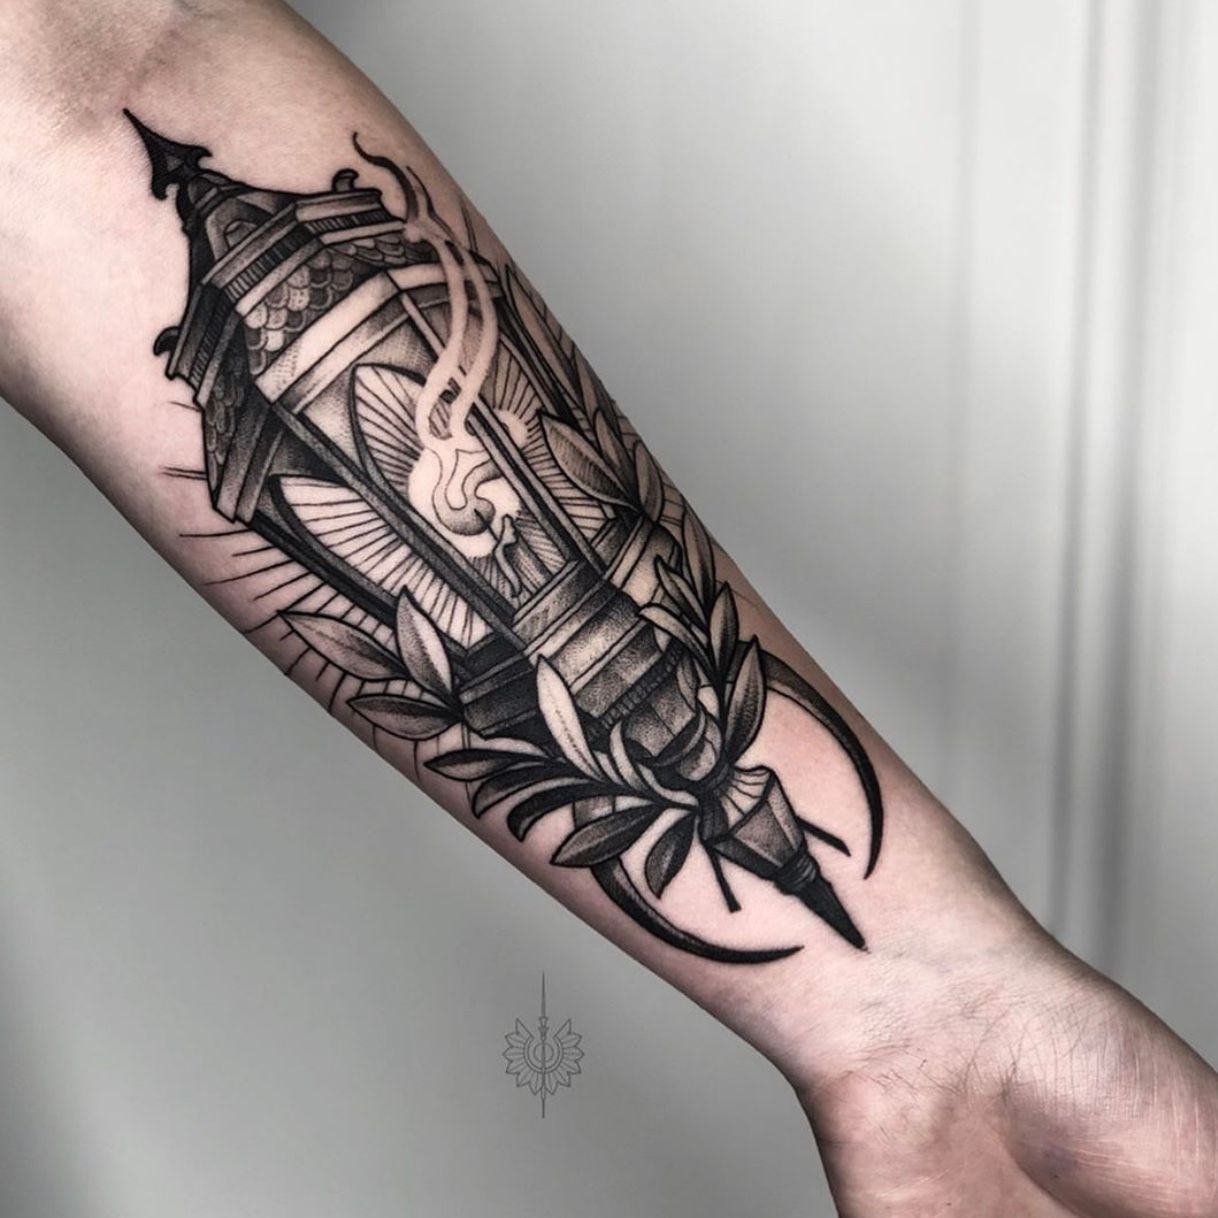 Adam Abstract Tattoo UK Narnia lamppost 1 month old  standing bunny  fresh  rtattoos